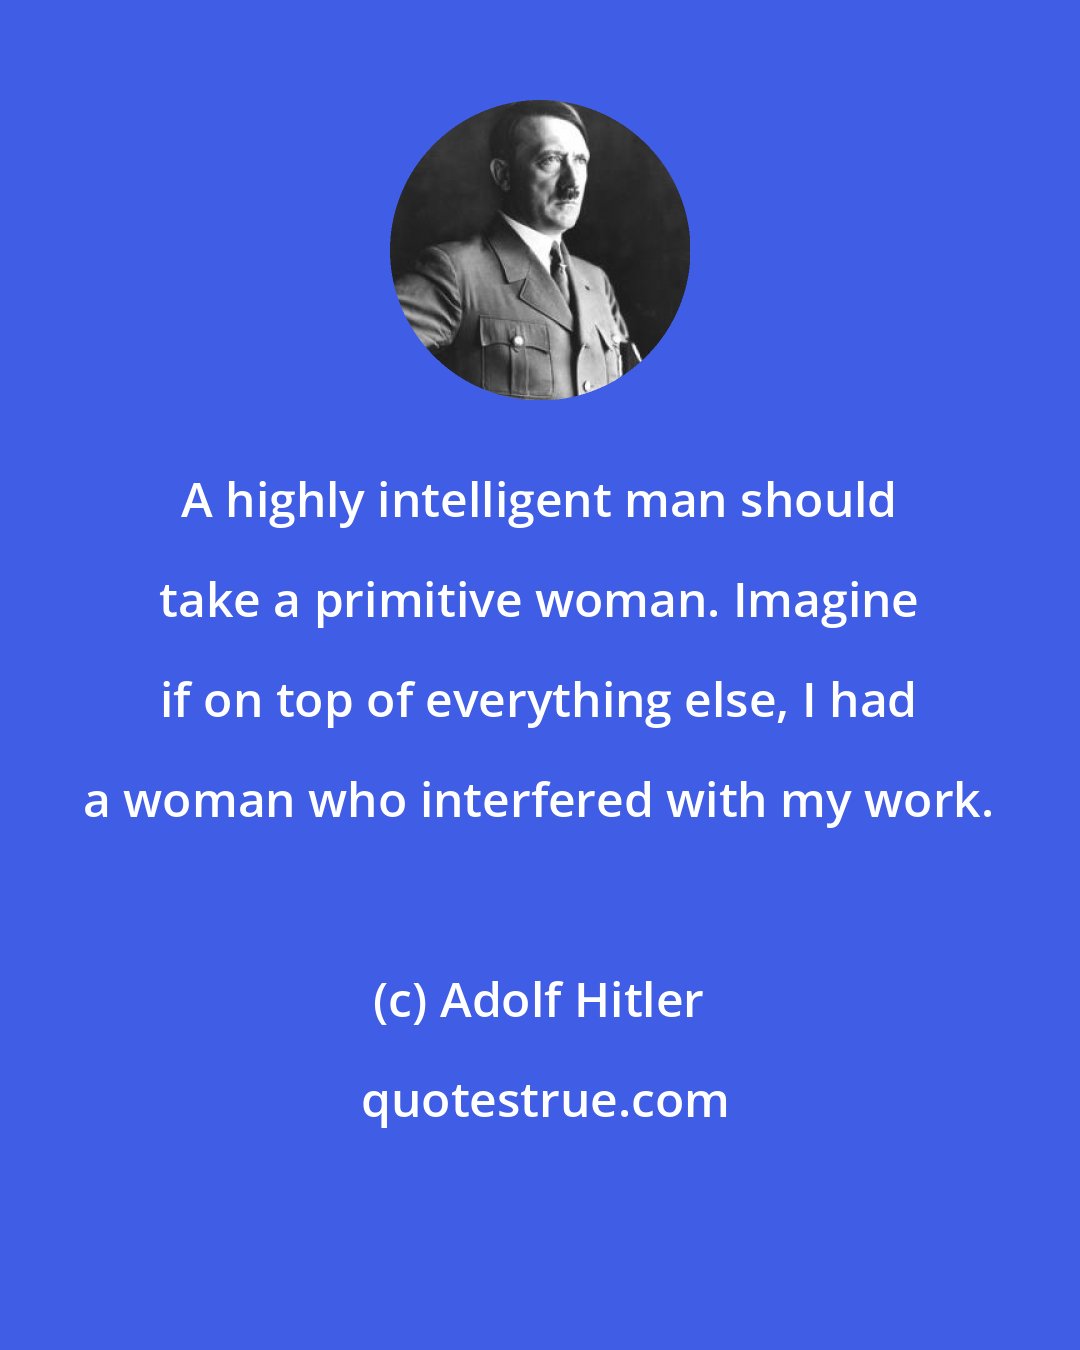 Adolf Hitler: A highly intelligent man should take a primitive woman. Imagine if on top of everything else, I had a woman who interfered with my work.